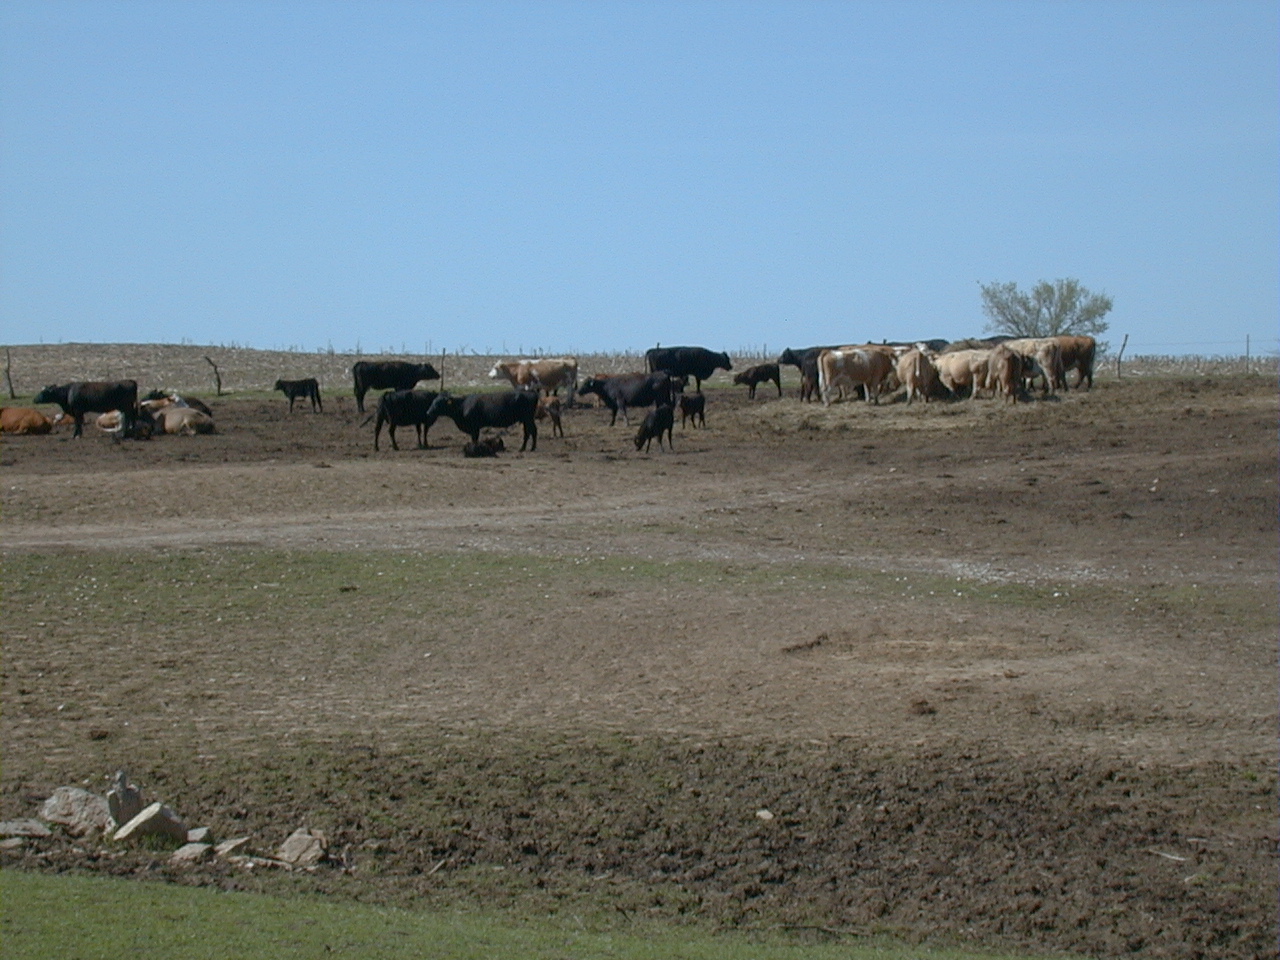 Confining cattle to feed lots leads to devegetation, erosion and water quality problems including fecal coliform contamination.